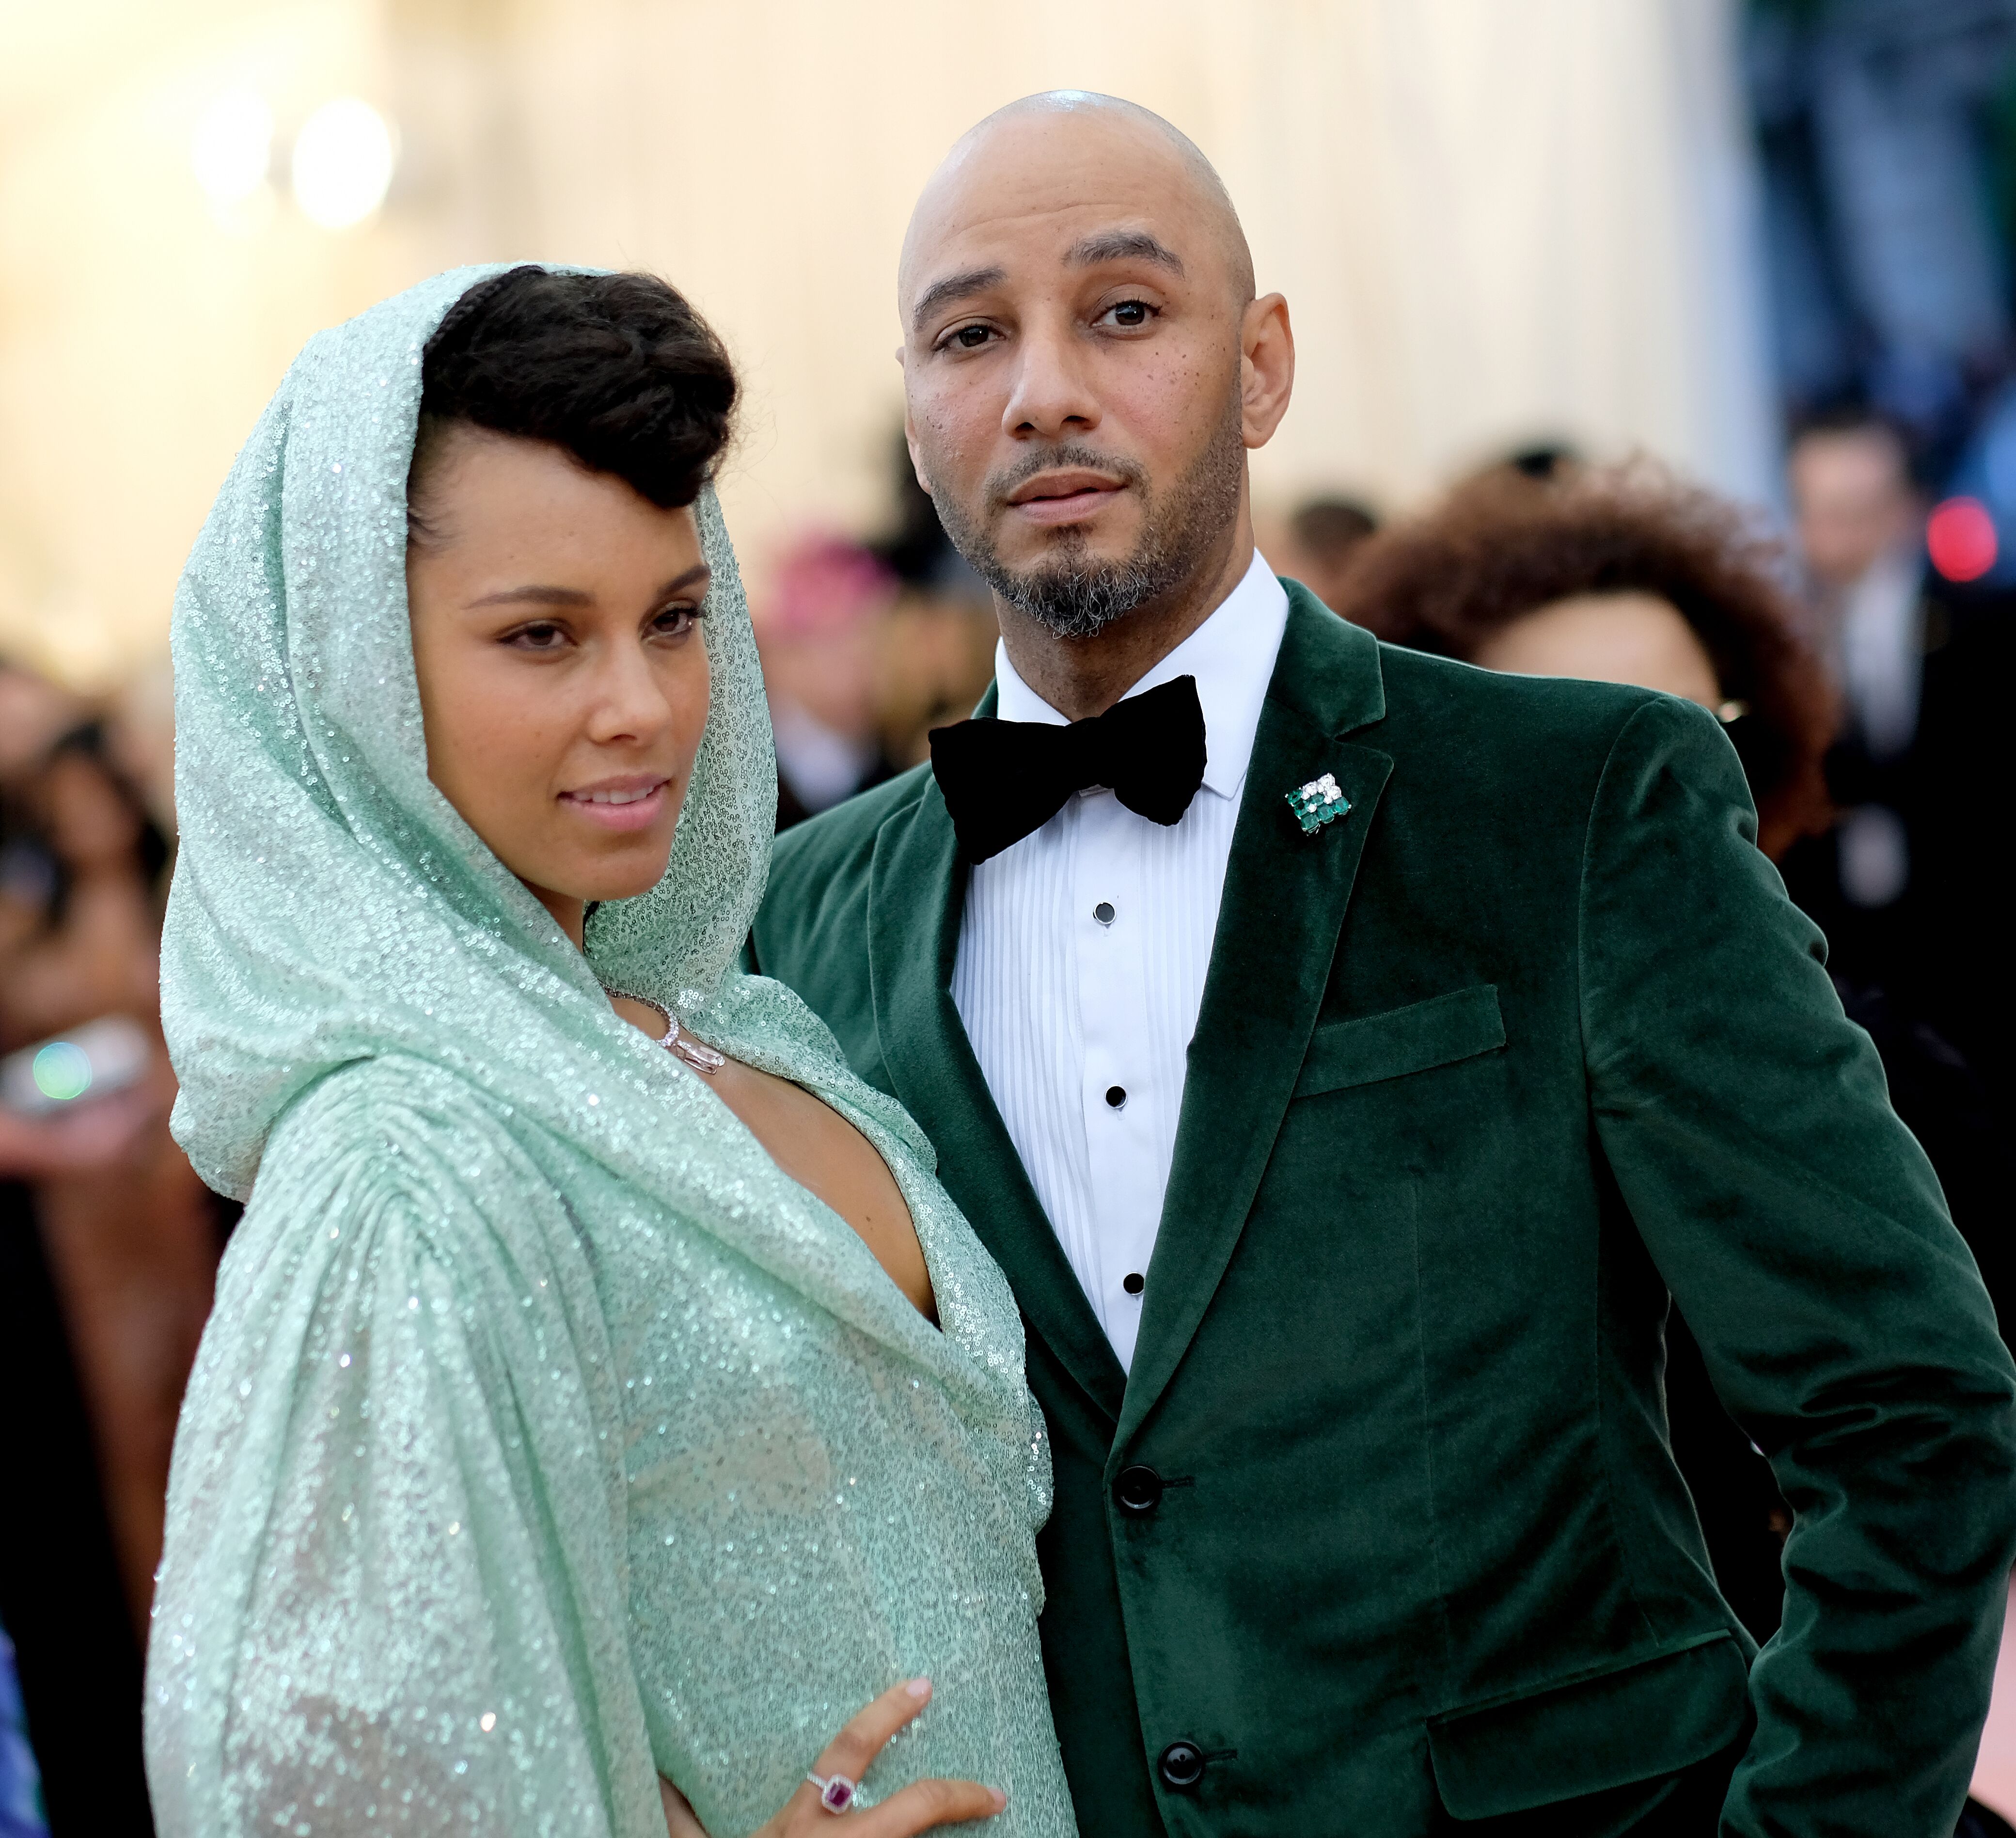 Alicia Keys and Swizz Beatz at the 2019 Met Gala at the Metropolitan Museum of Art in 2019 | Photo: Getty Images